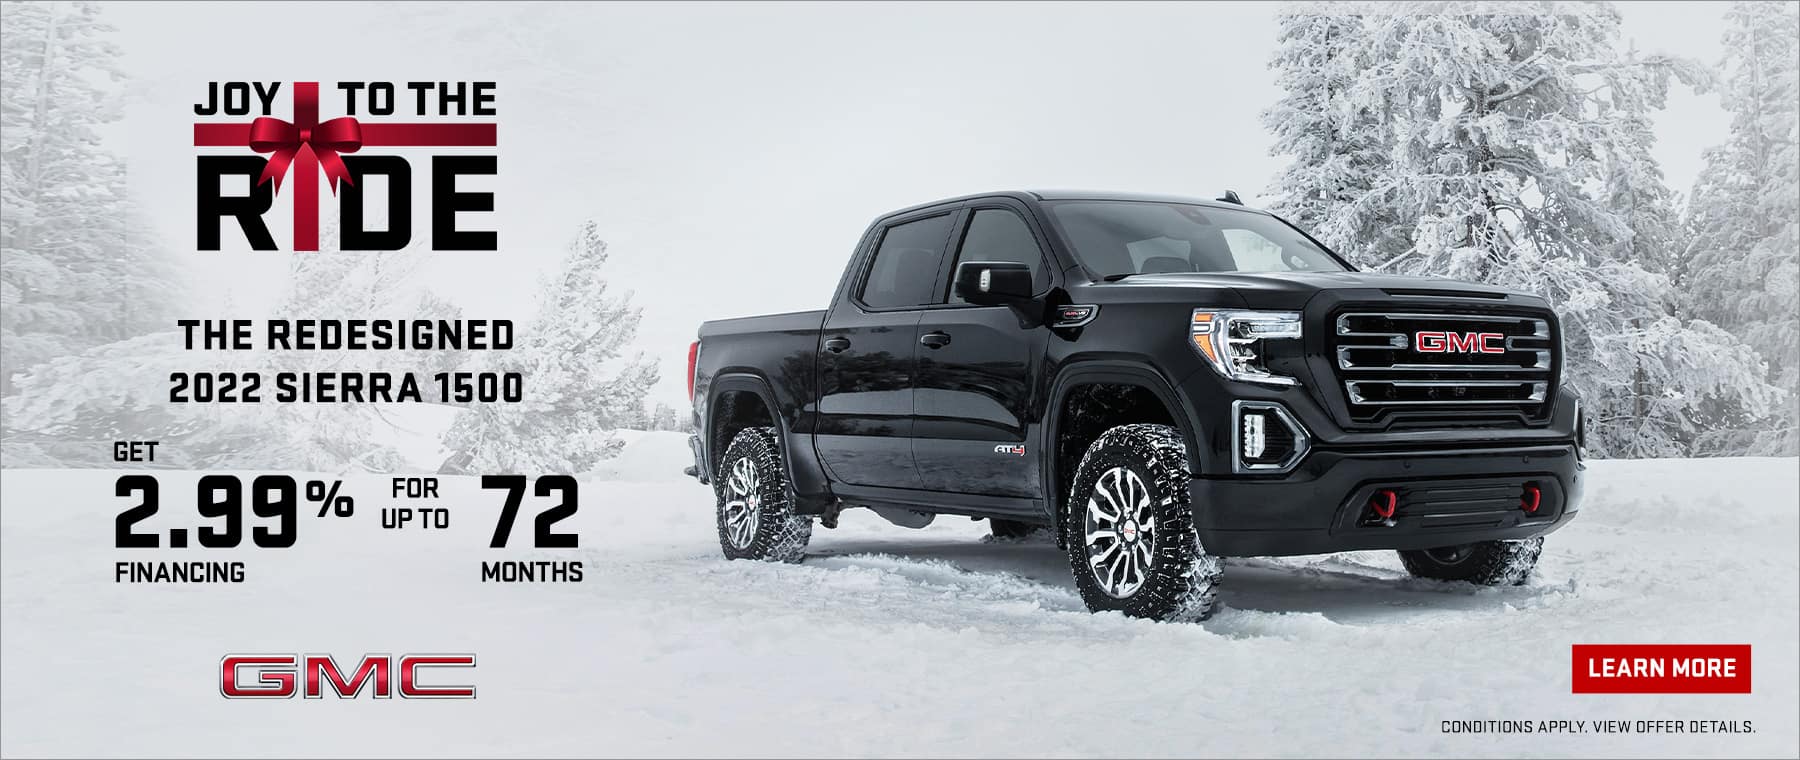 Get 2.99% financing for up to 72 months on a new 2022 GMC Sierra 1500.